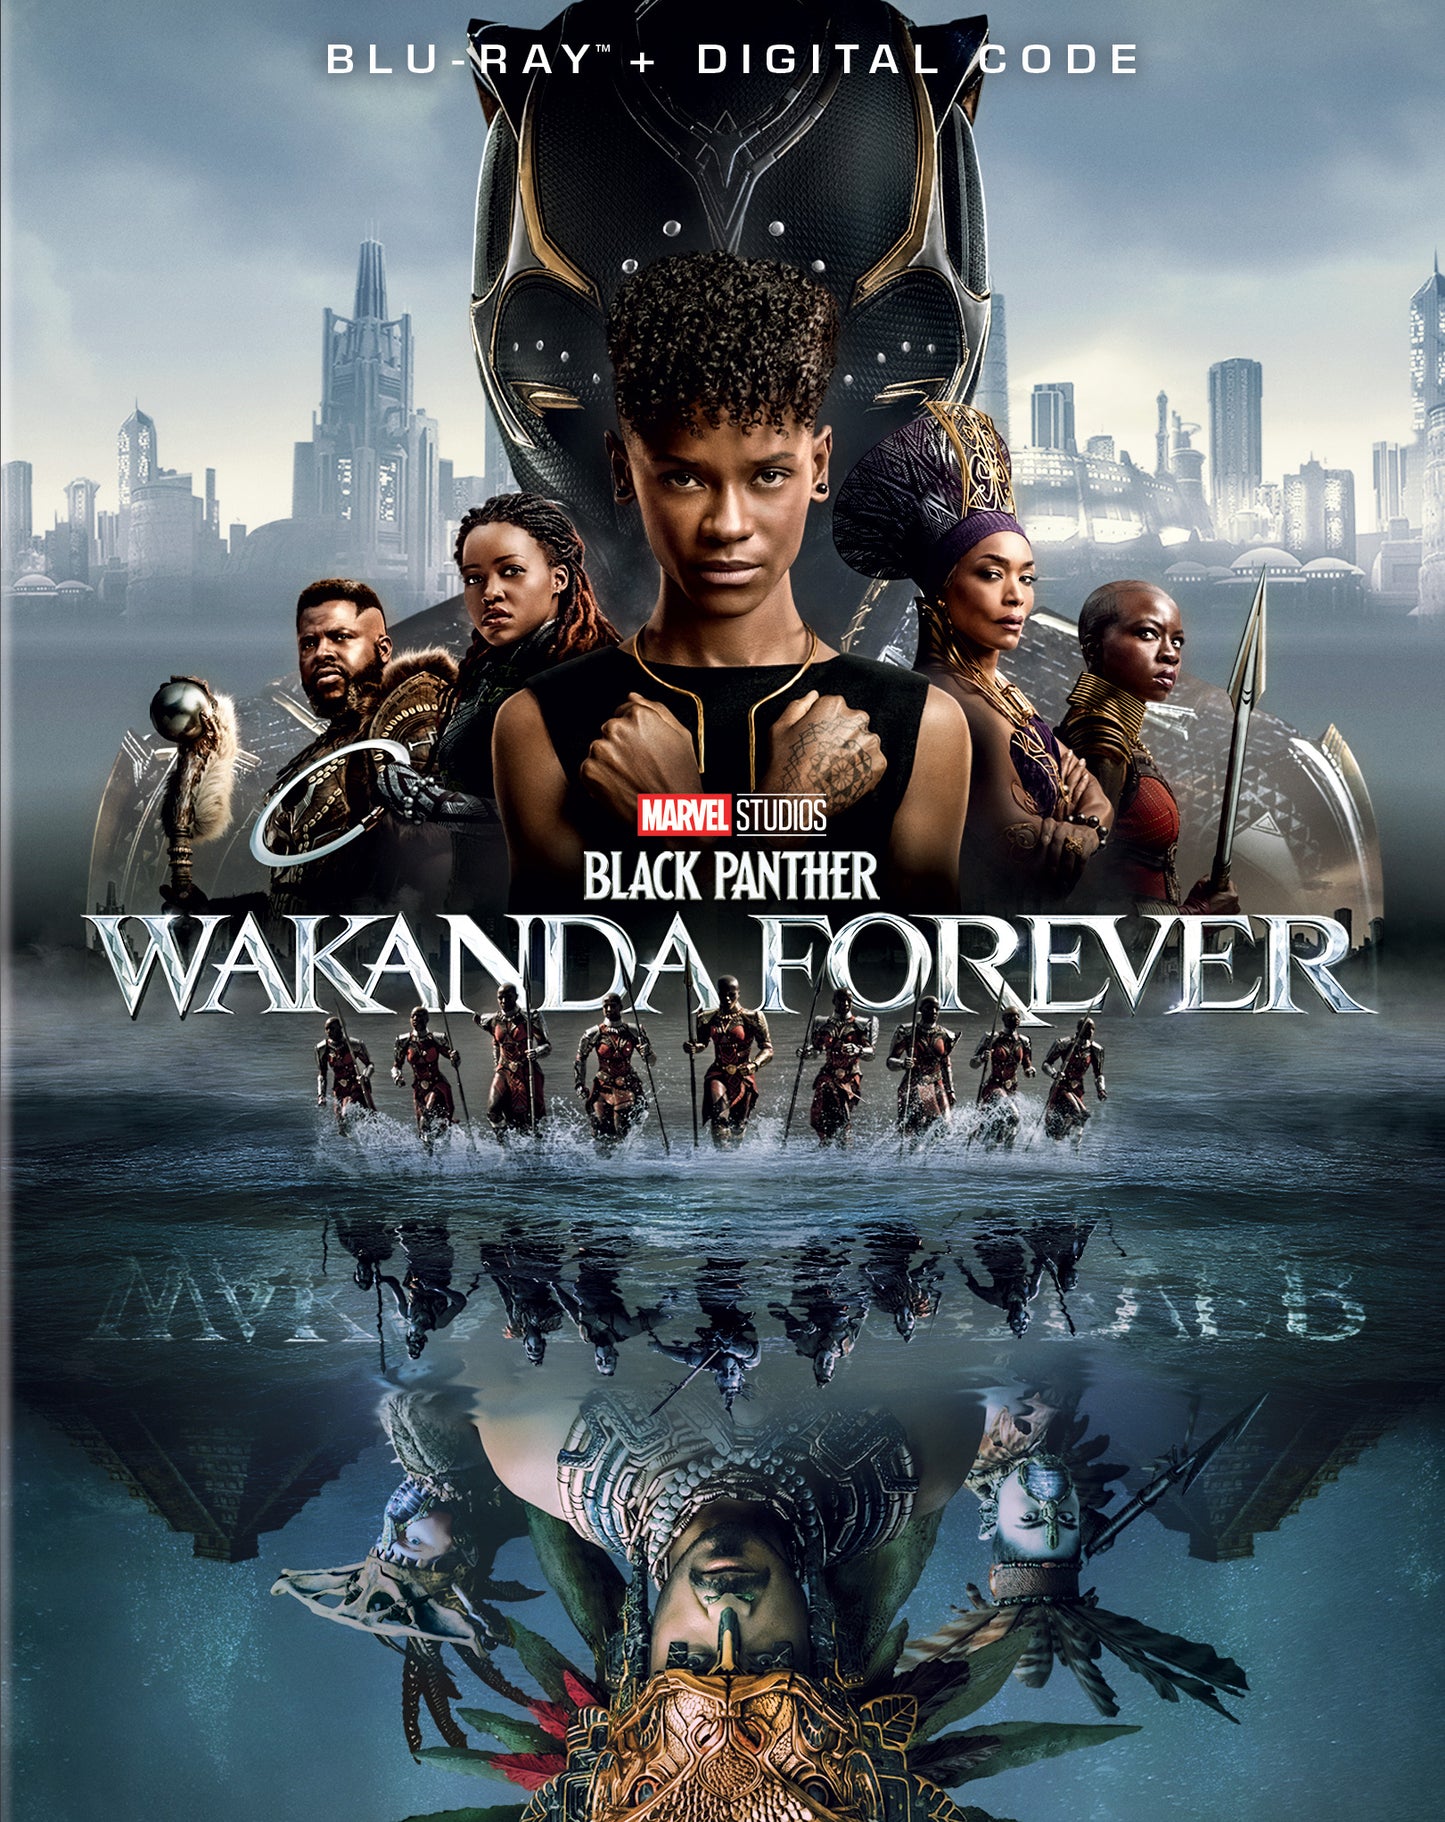 Black Panther: Wakanda Forever [Includes Digital Copy] [Blu-ray] cover art